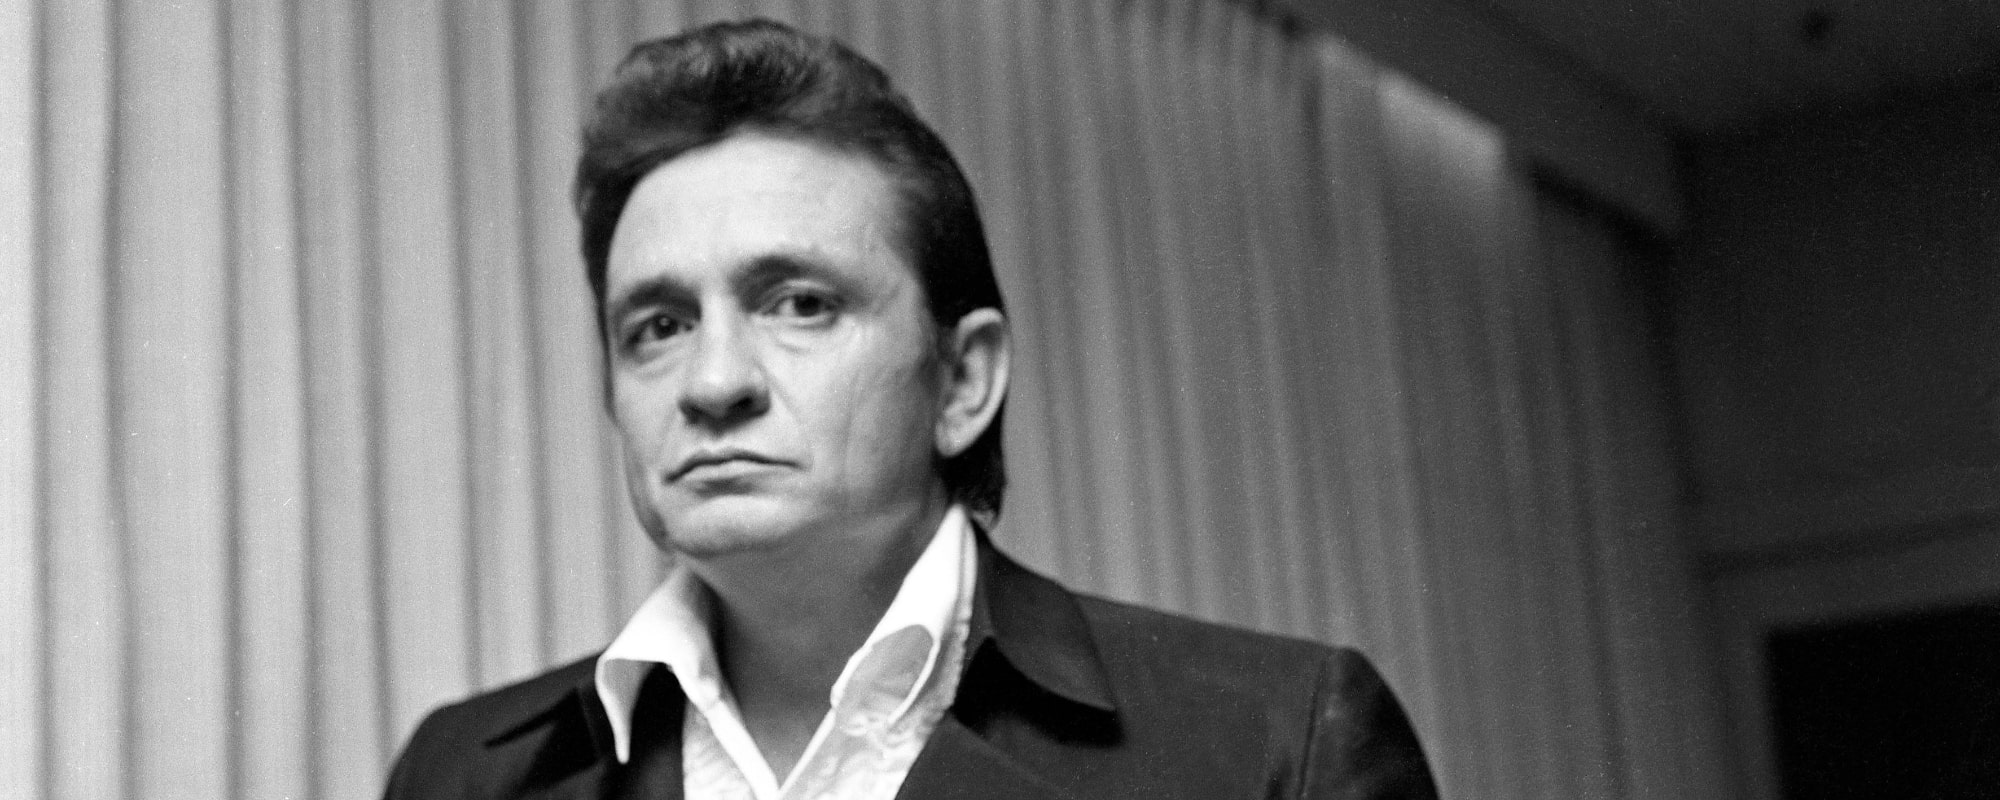 Remember When Johnny Cash Had a Wardrobe Malfunction in Front of a Former First Lady?